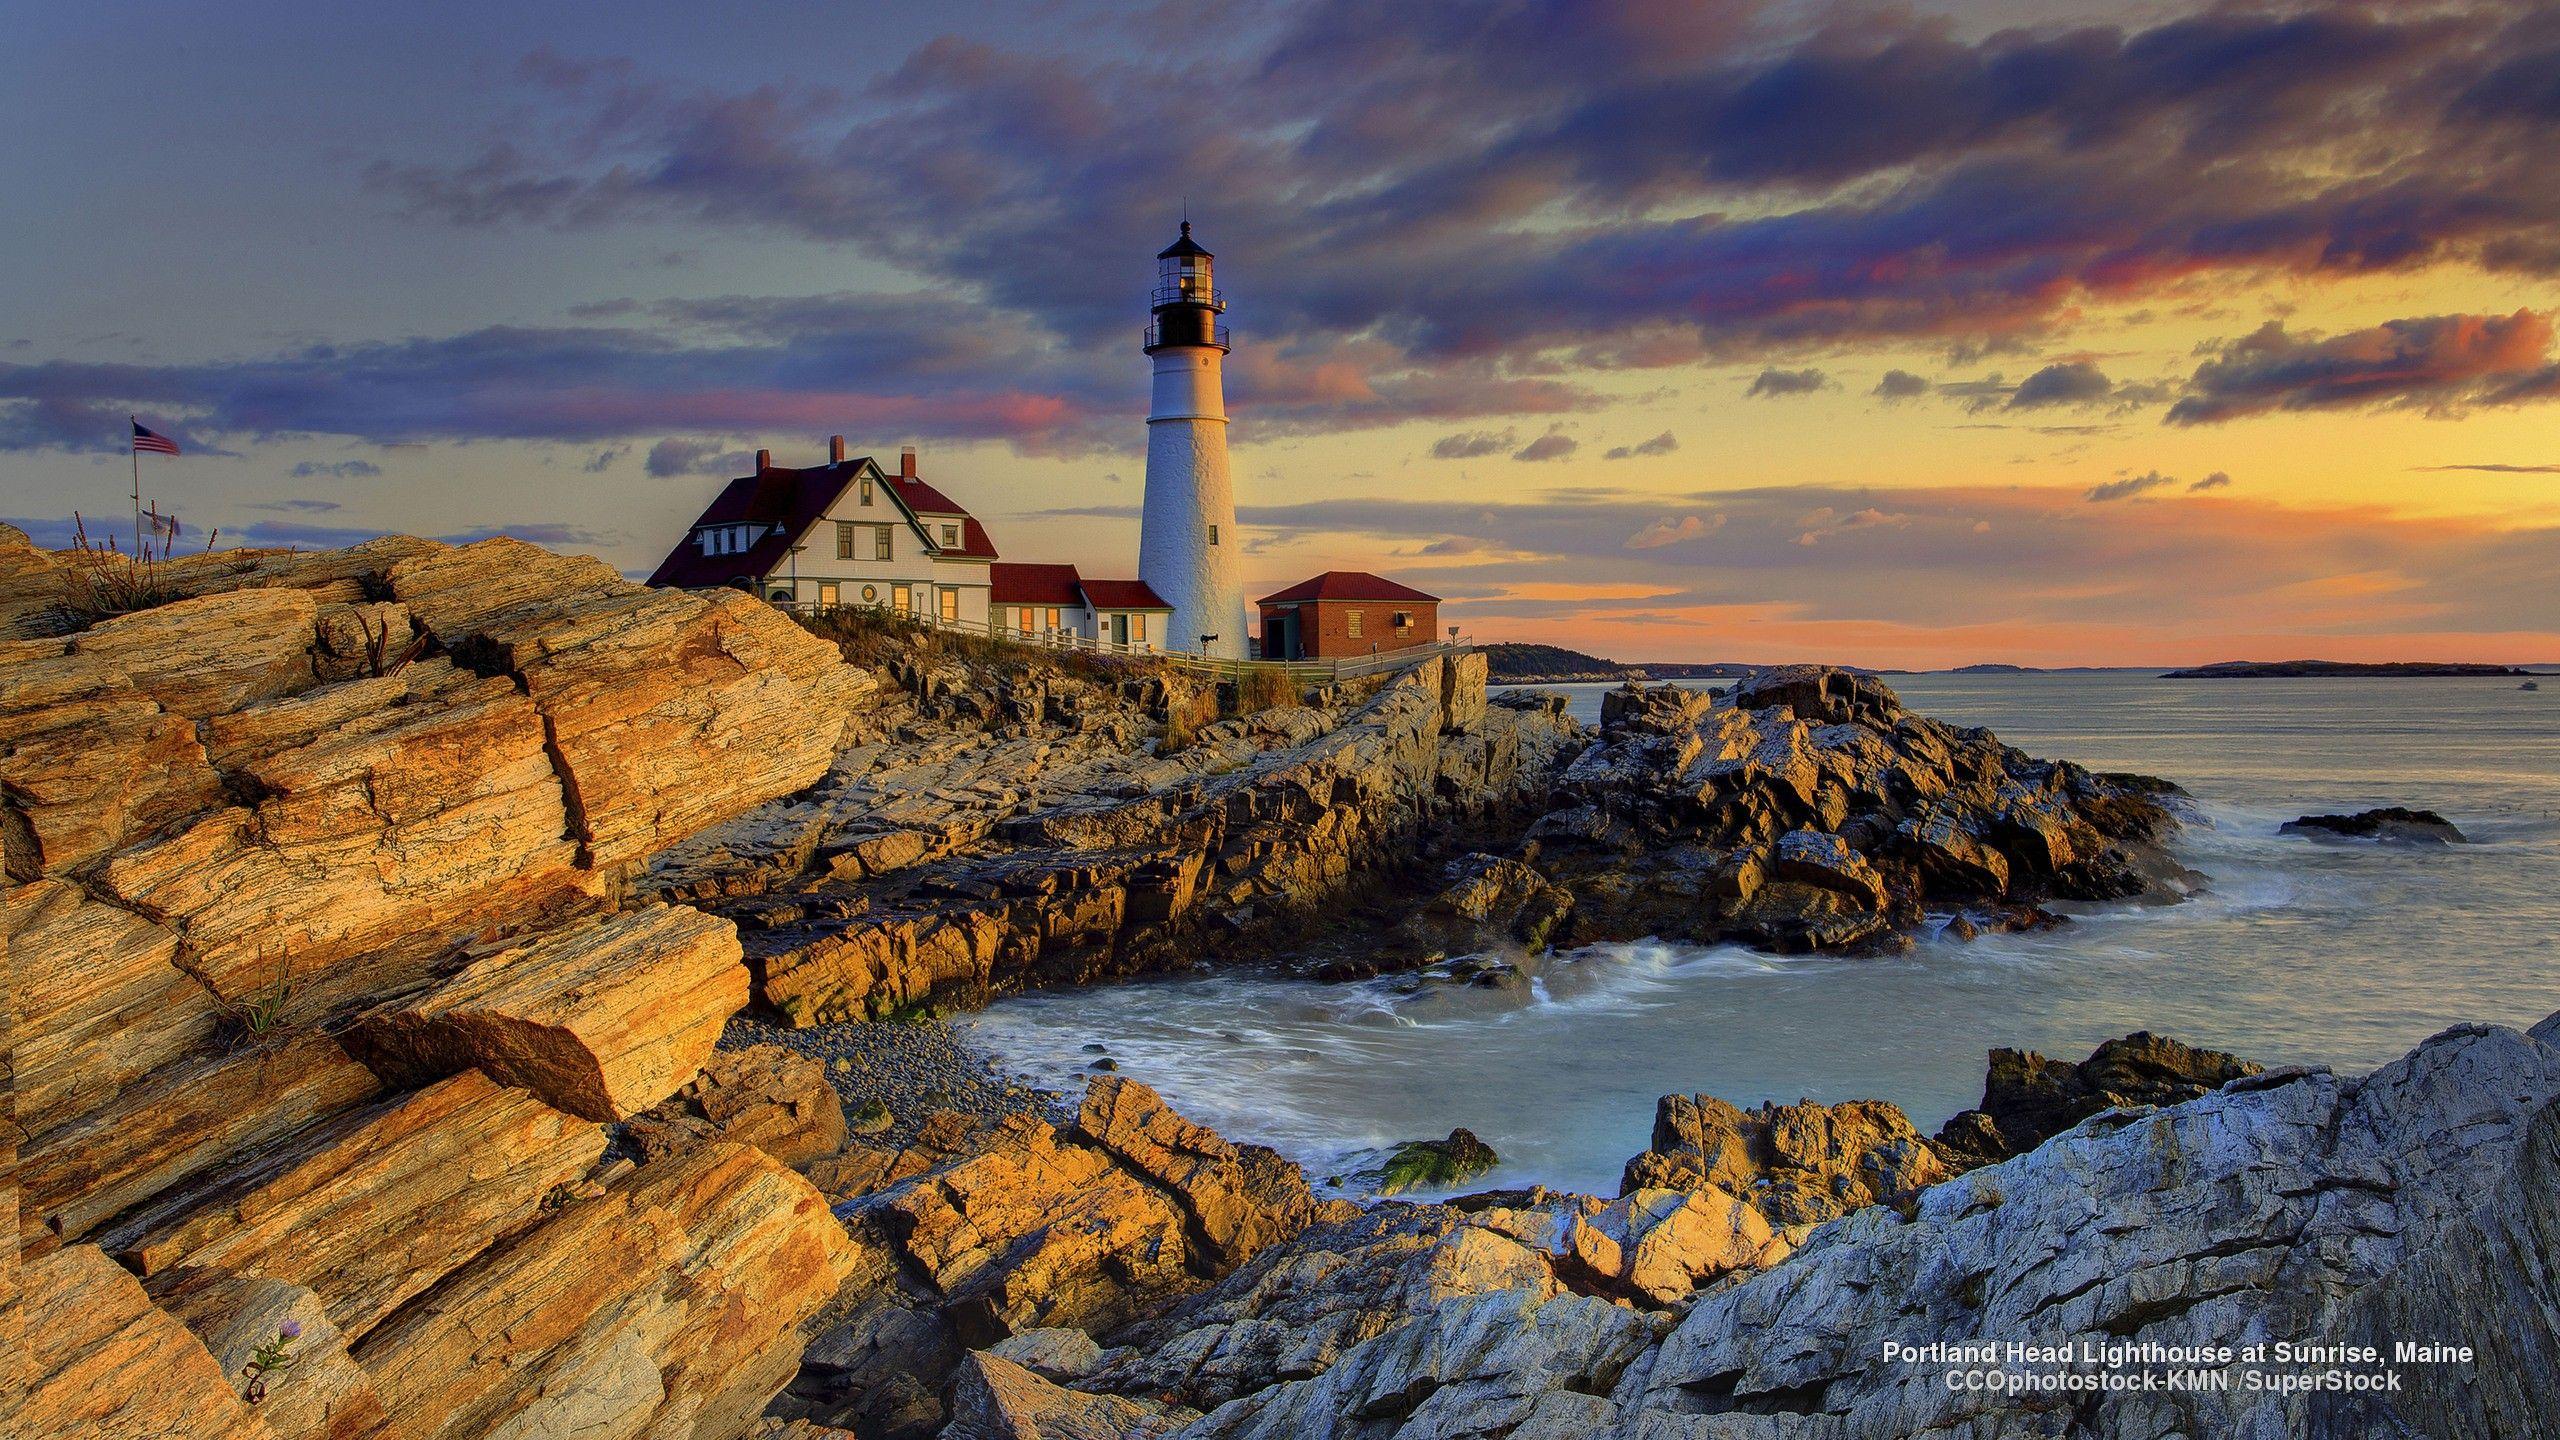 Maine Hd Wallpapers Top Free Maine Hd Backgrounds Wallpaperaccess Images, Photos, Reviews